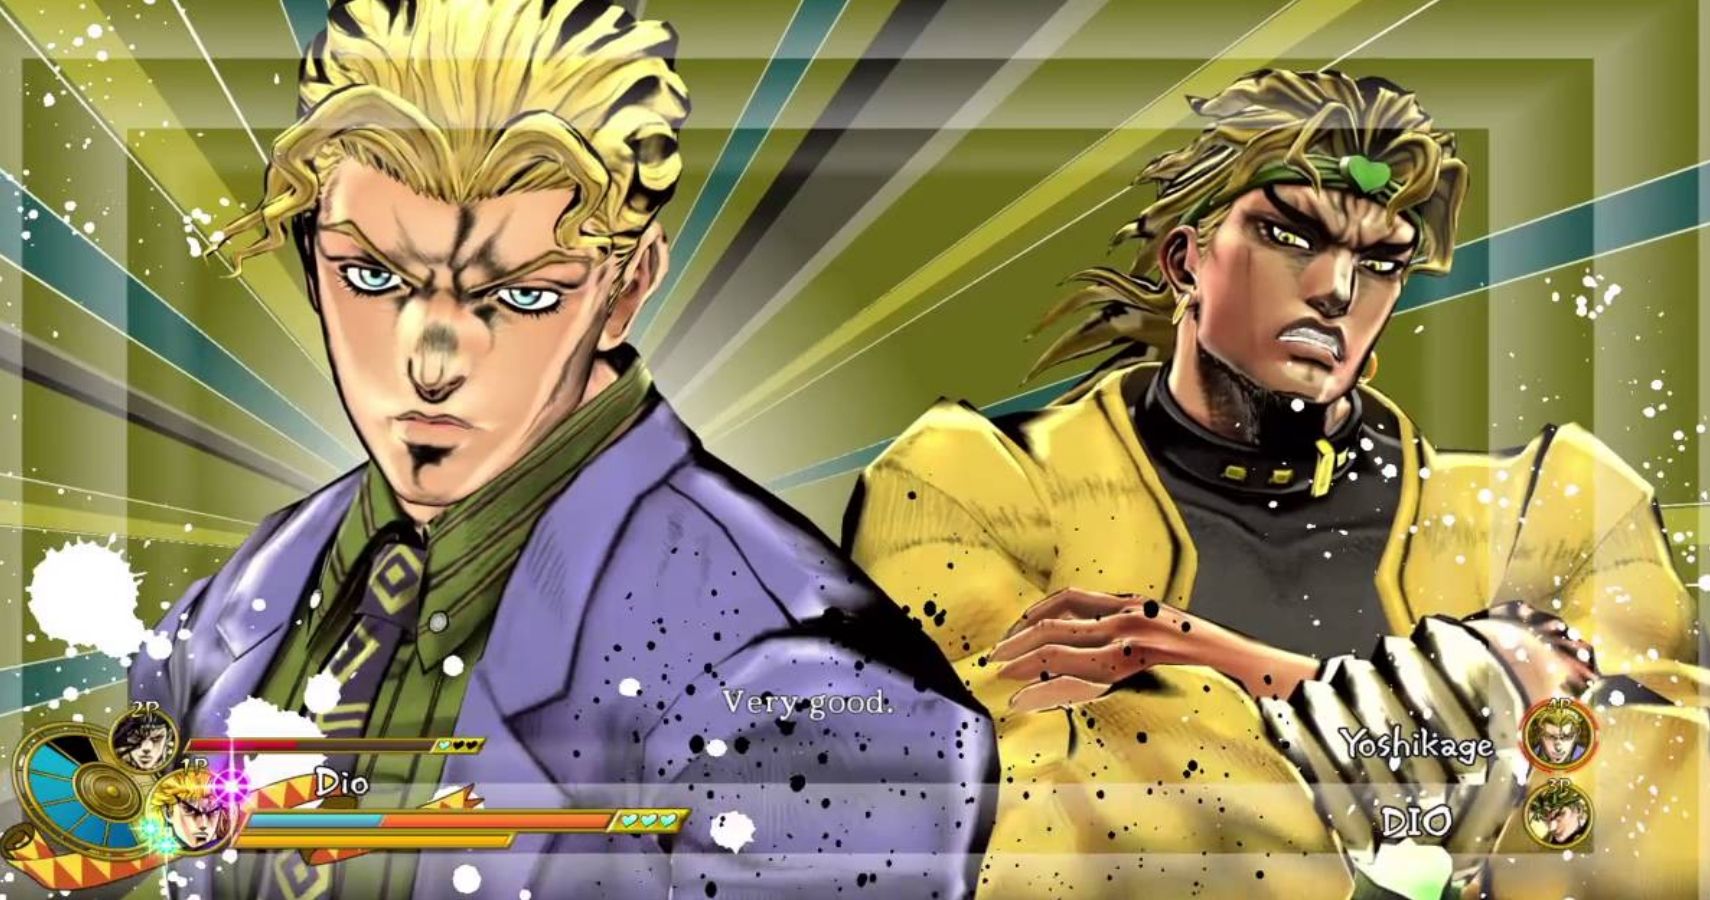 Jojo 5 Reasons Why Dio Is The Best Villain 5 Reasons Why It S Kira